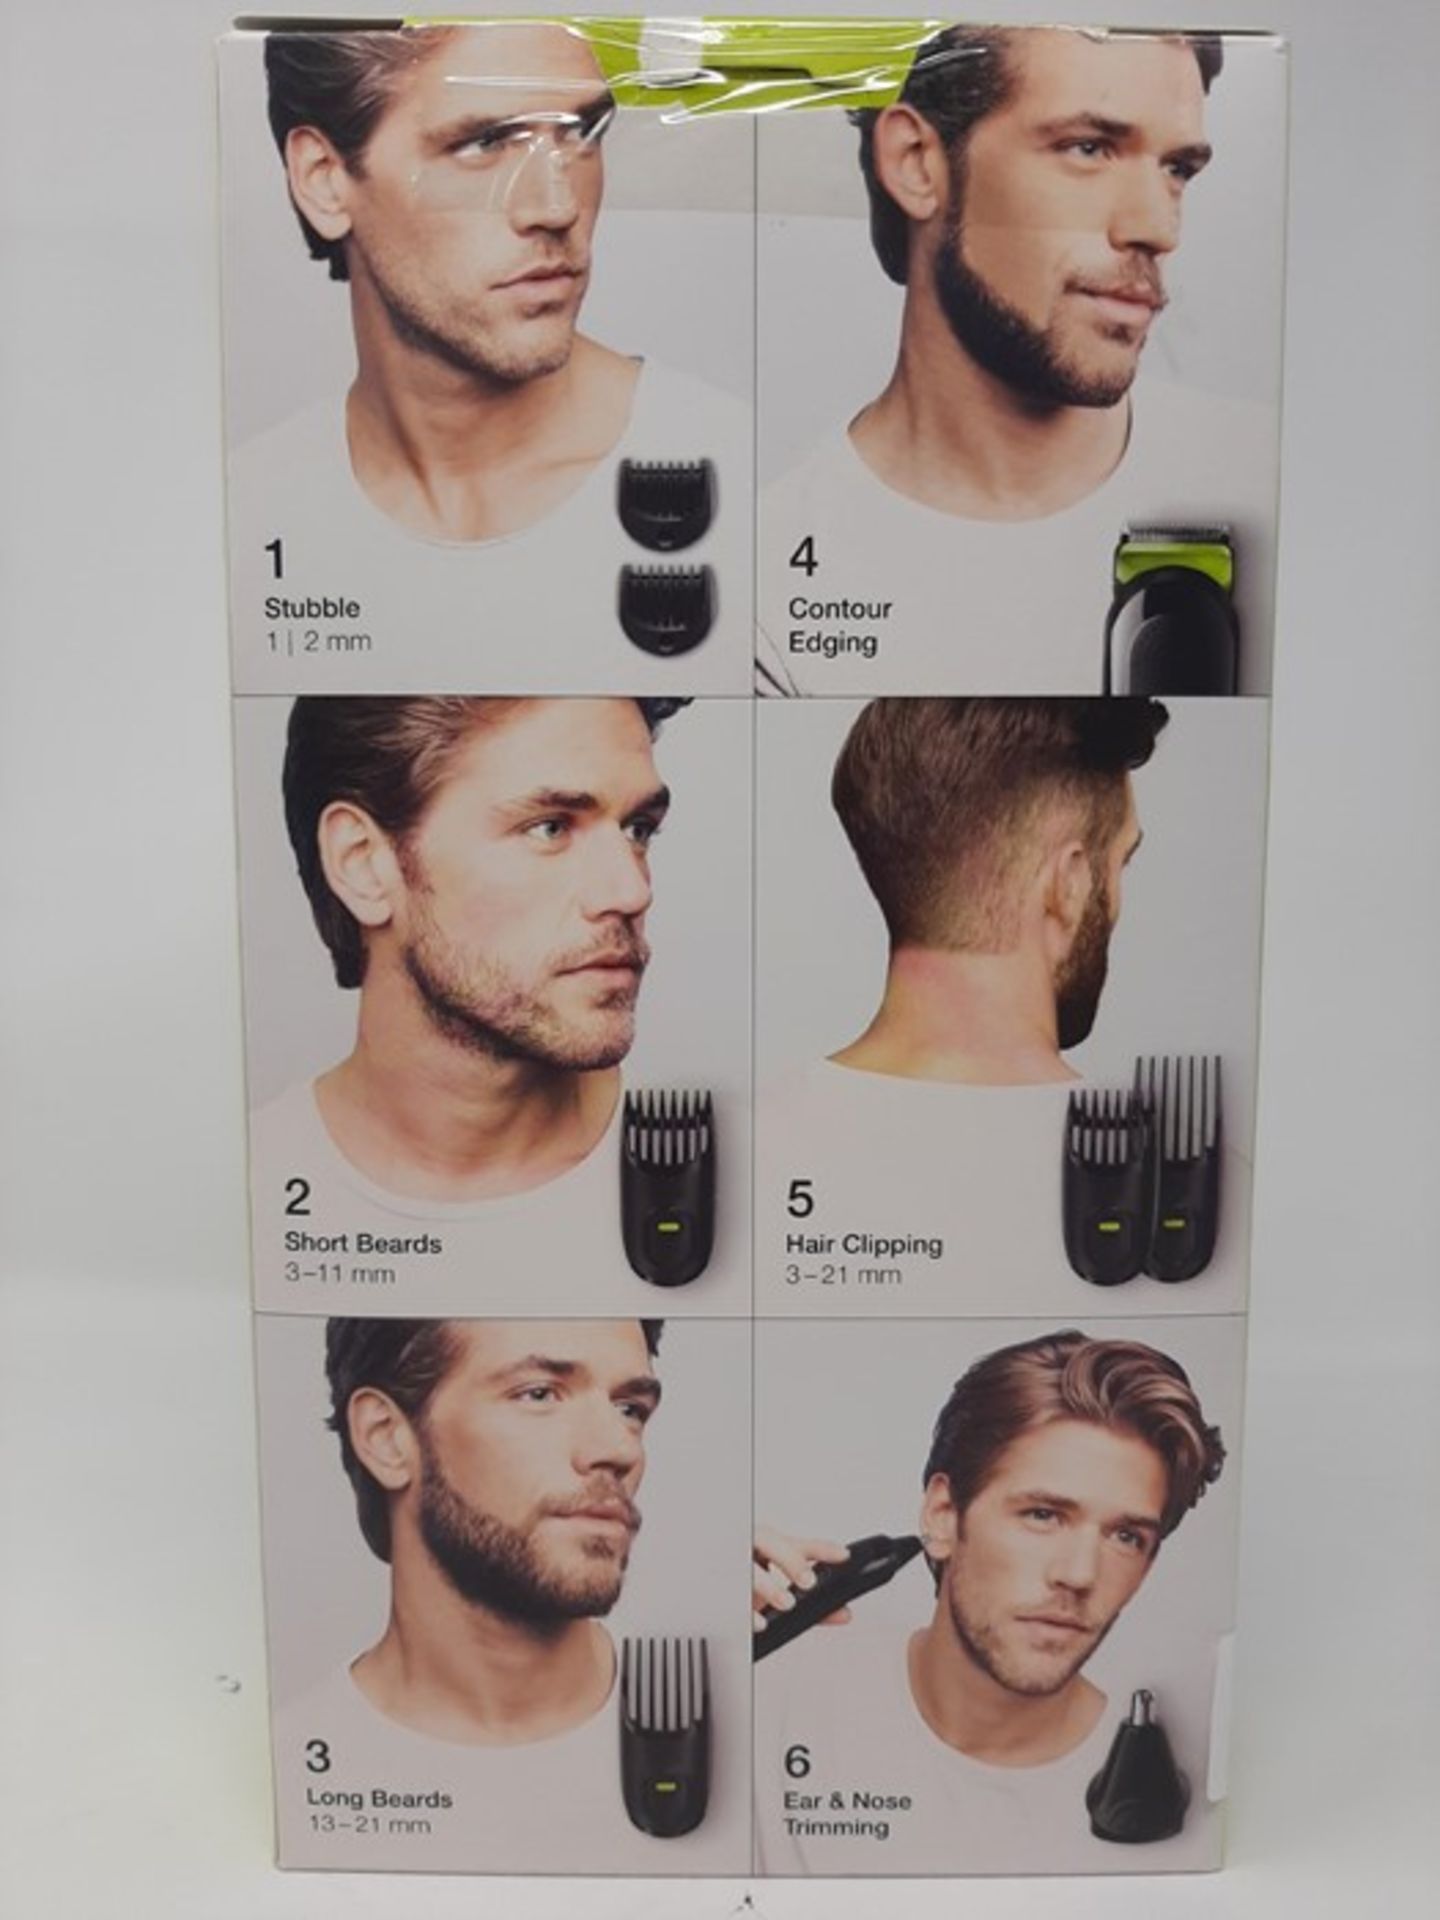 Braun 6-in-1 All-in-one Trimmer 3 MGK3221, Beard - Image 2 of 2